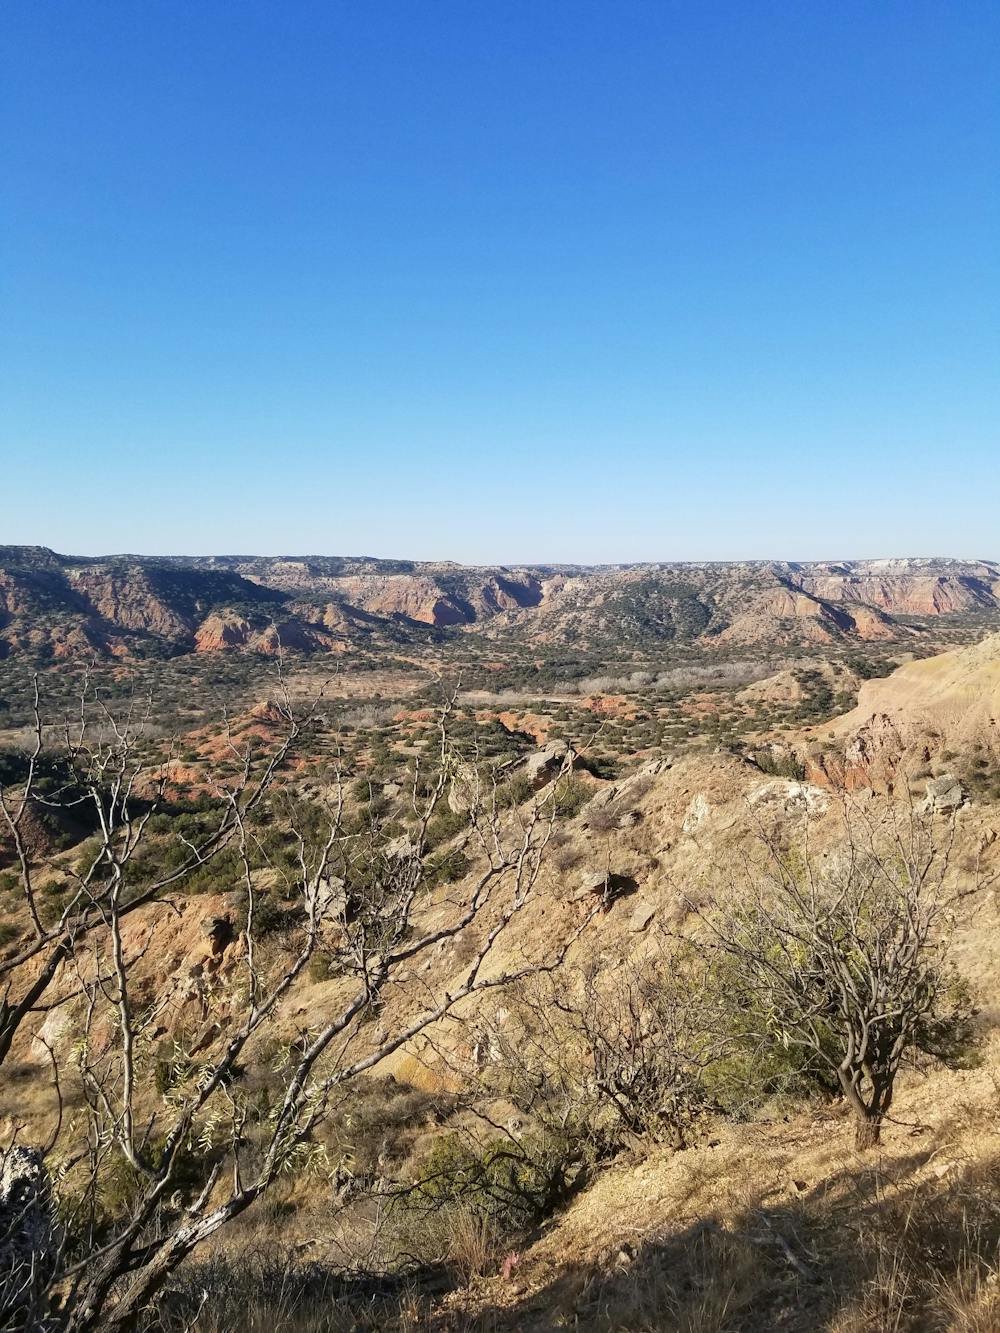 View from the Comanche Trail